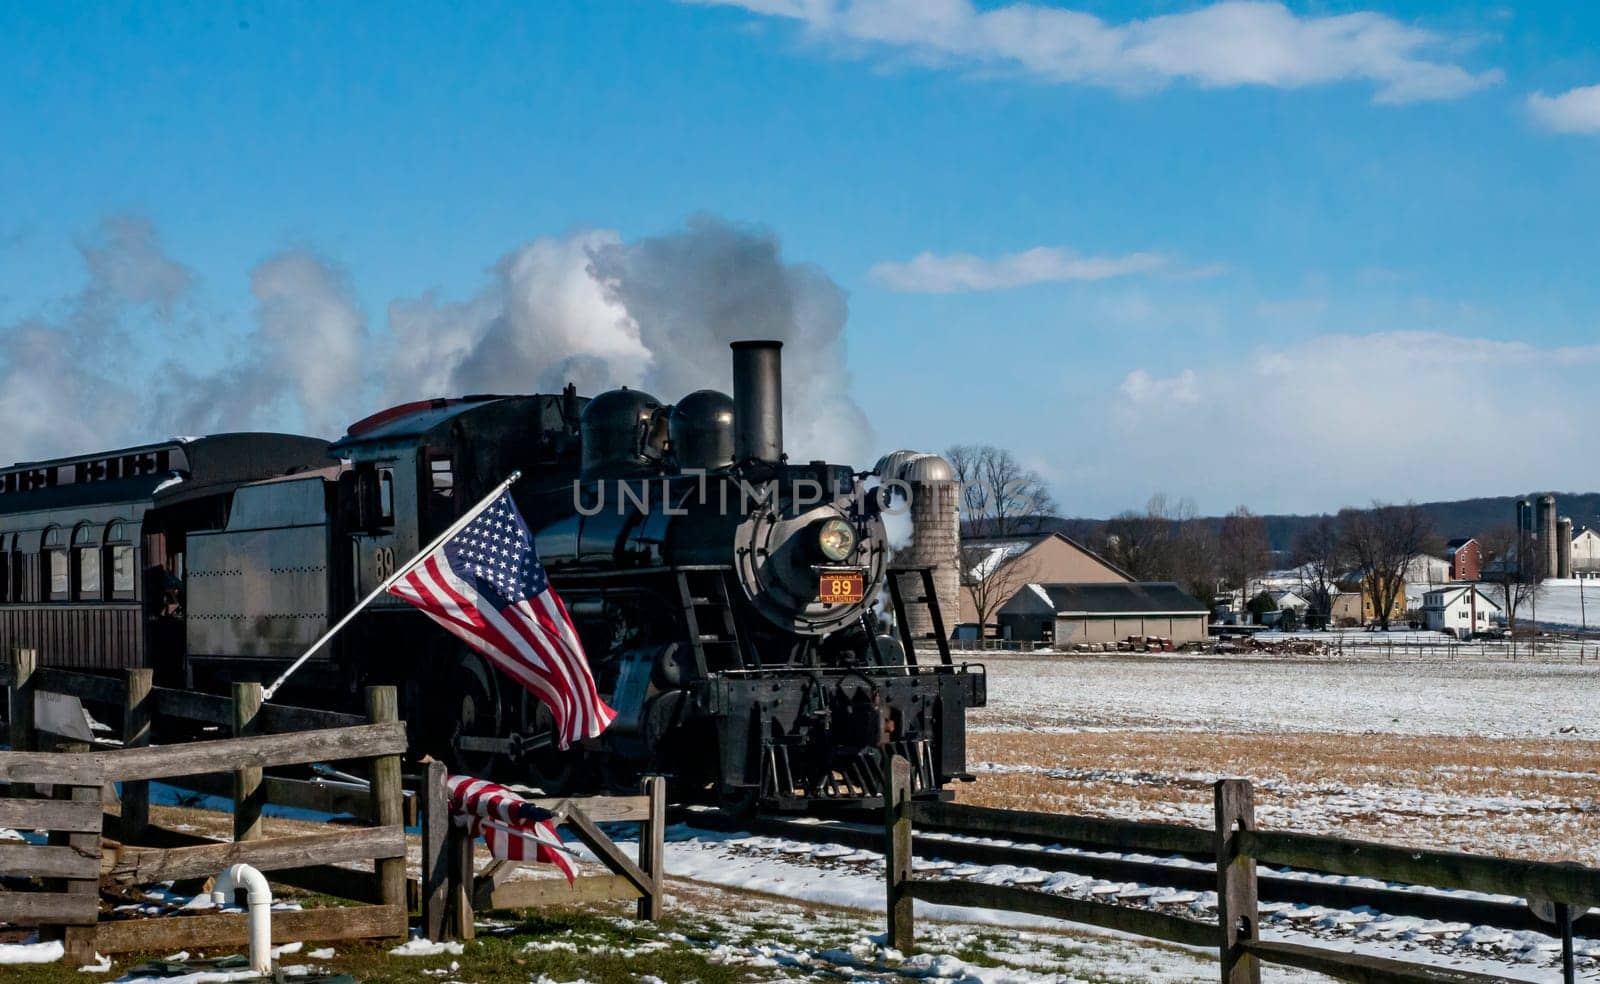 Ronks, Pennsylvania, USA, February 17, 2024 - A steam train is pulling a train car with an American flag on it. The train is traveling through a snowy field